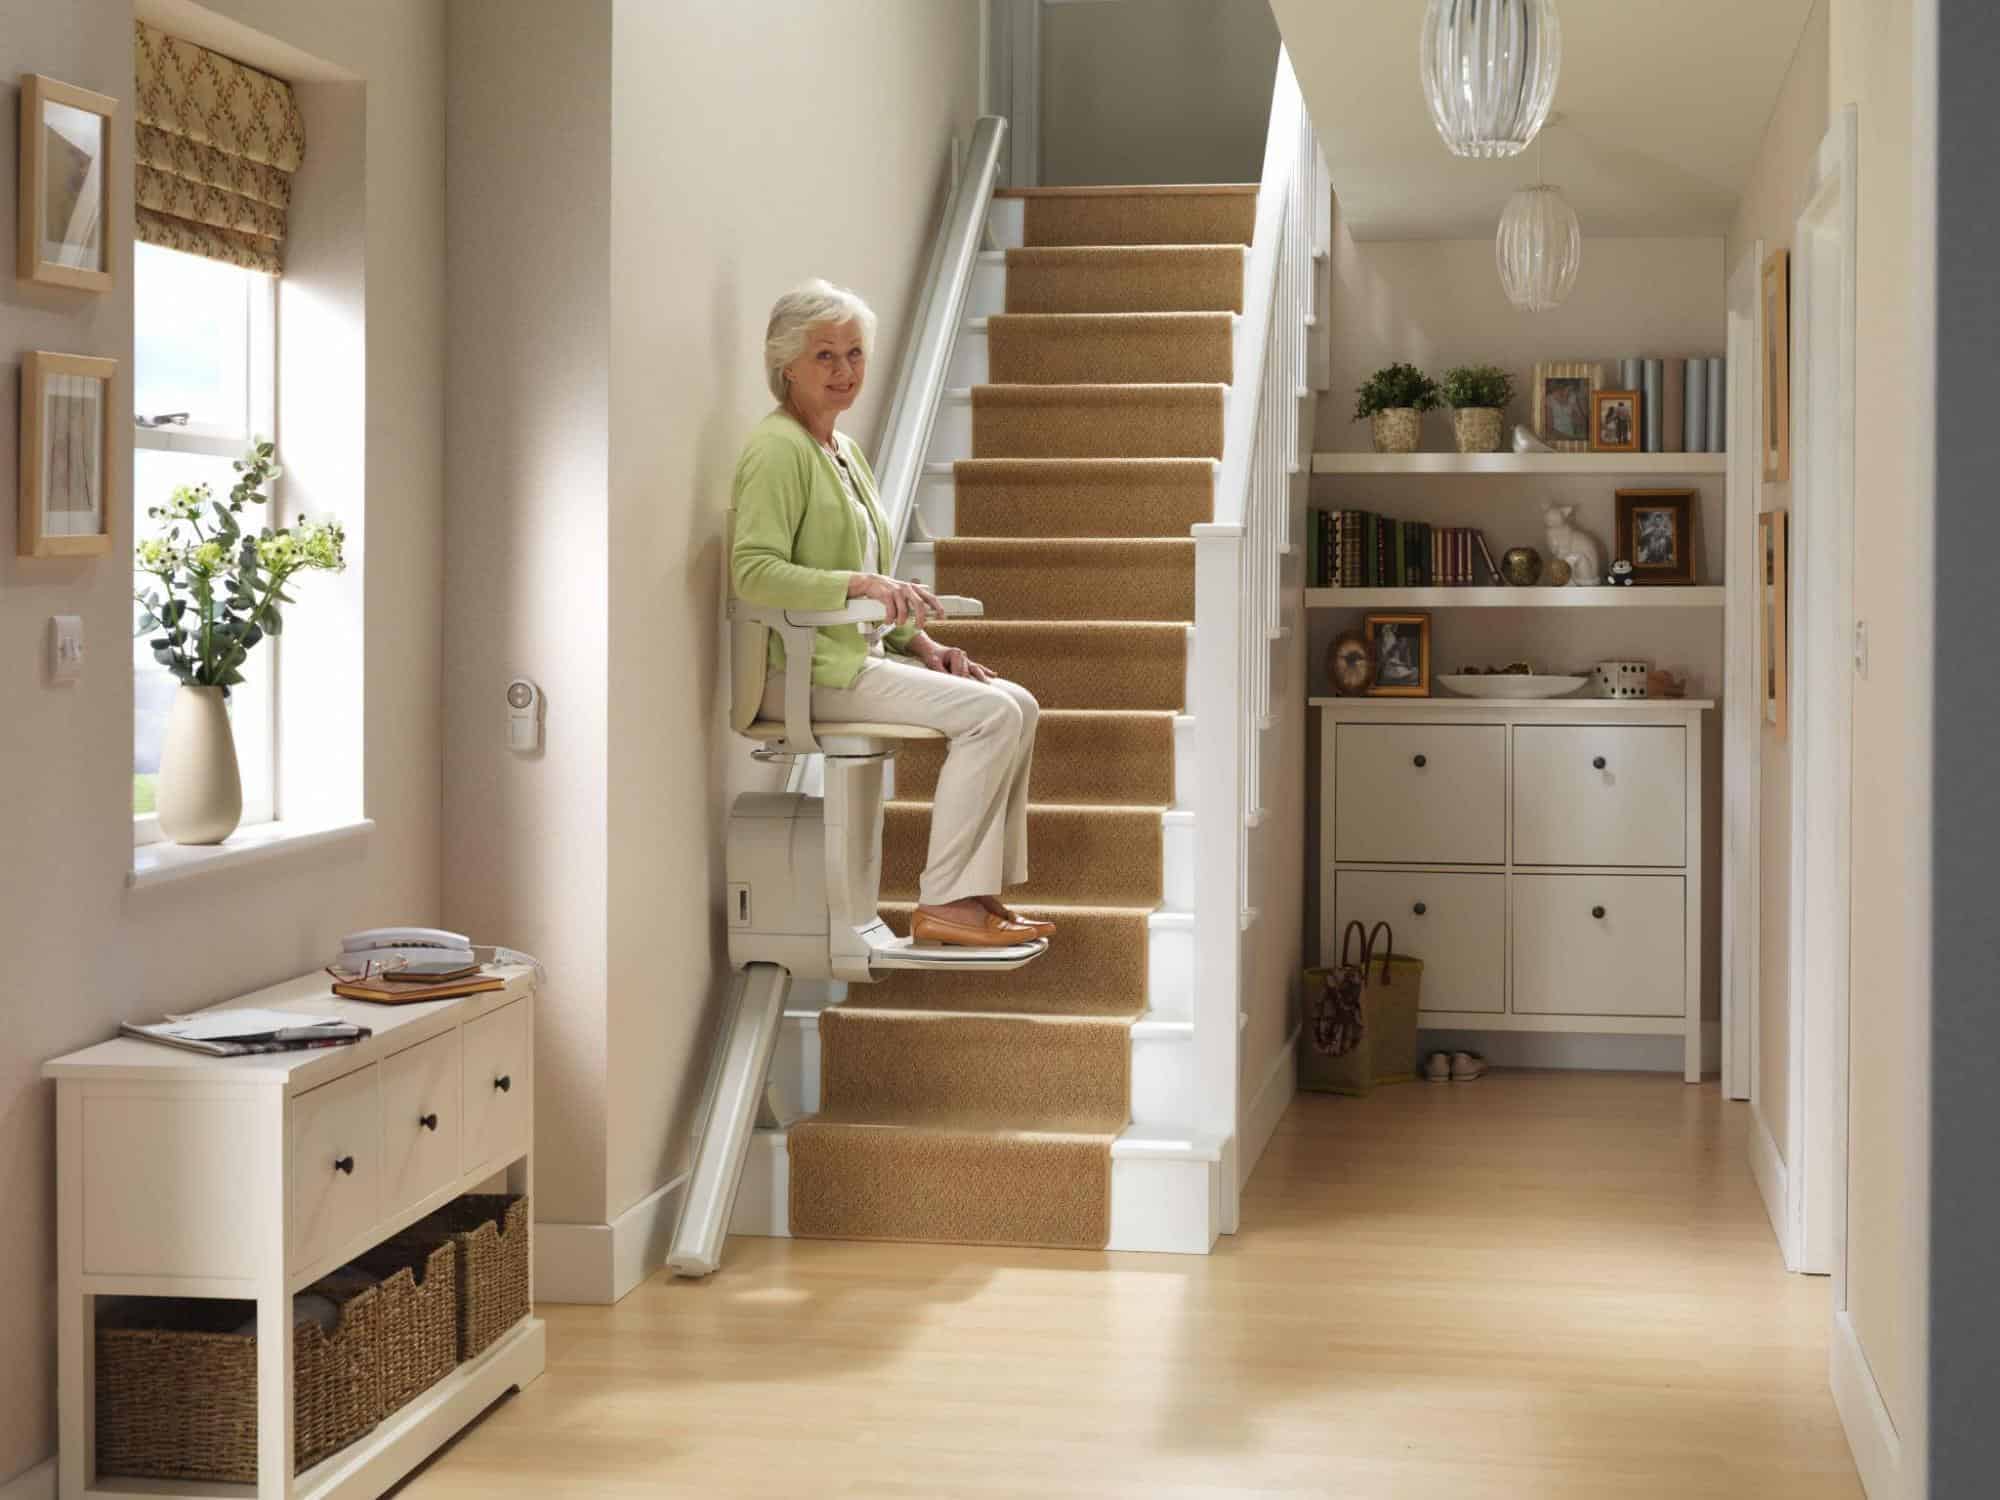 Stannah Stairlift Approved Dealer Manchester